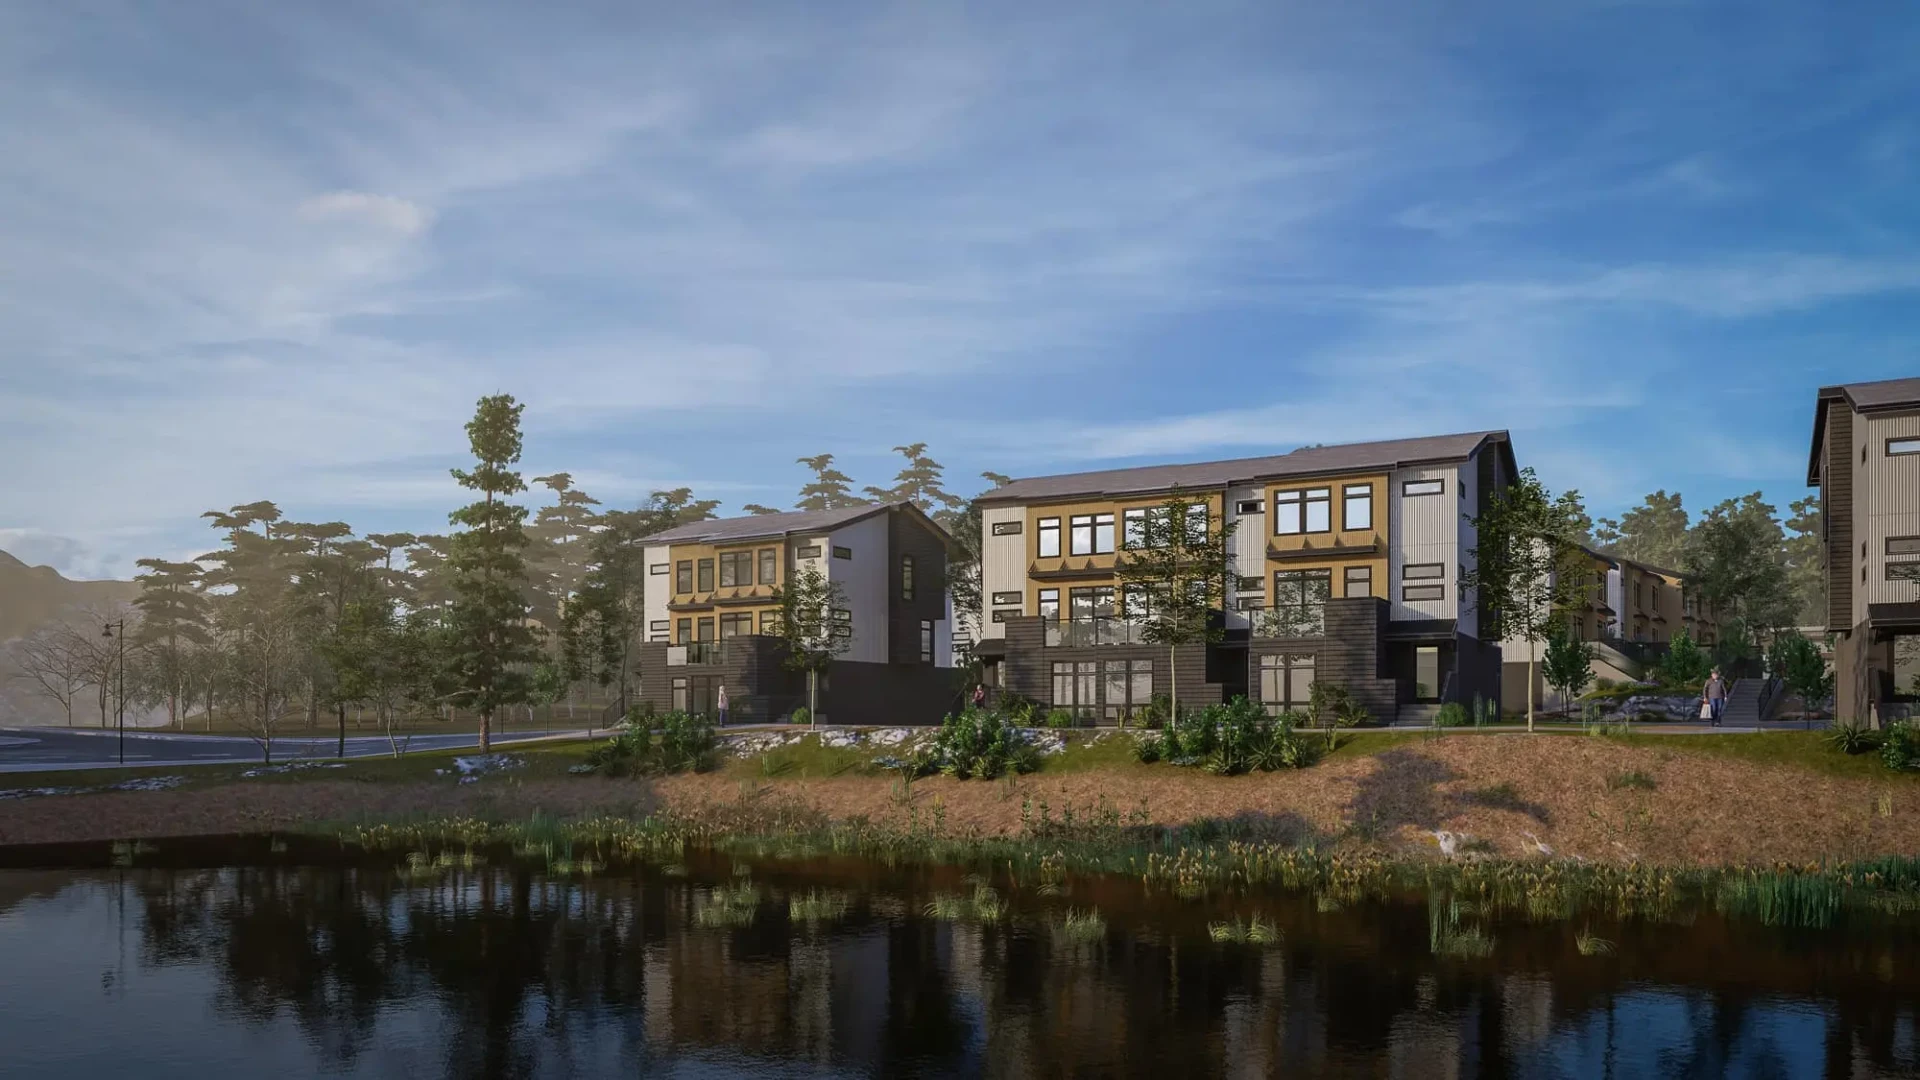 The Pines is a 45-unit townhome development by NADG.